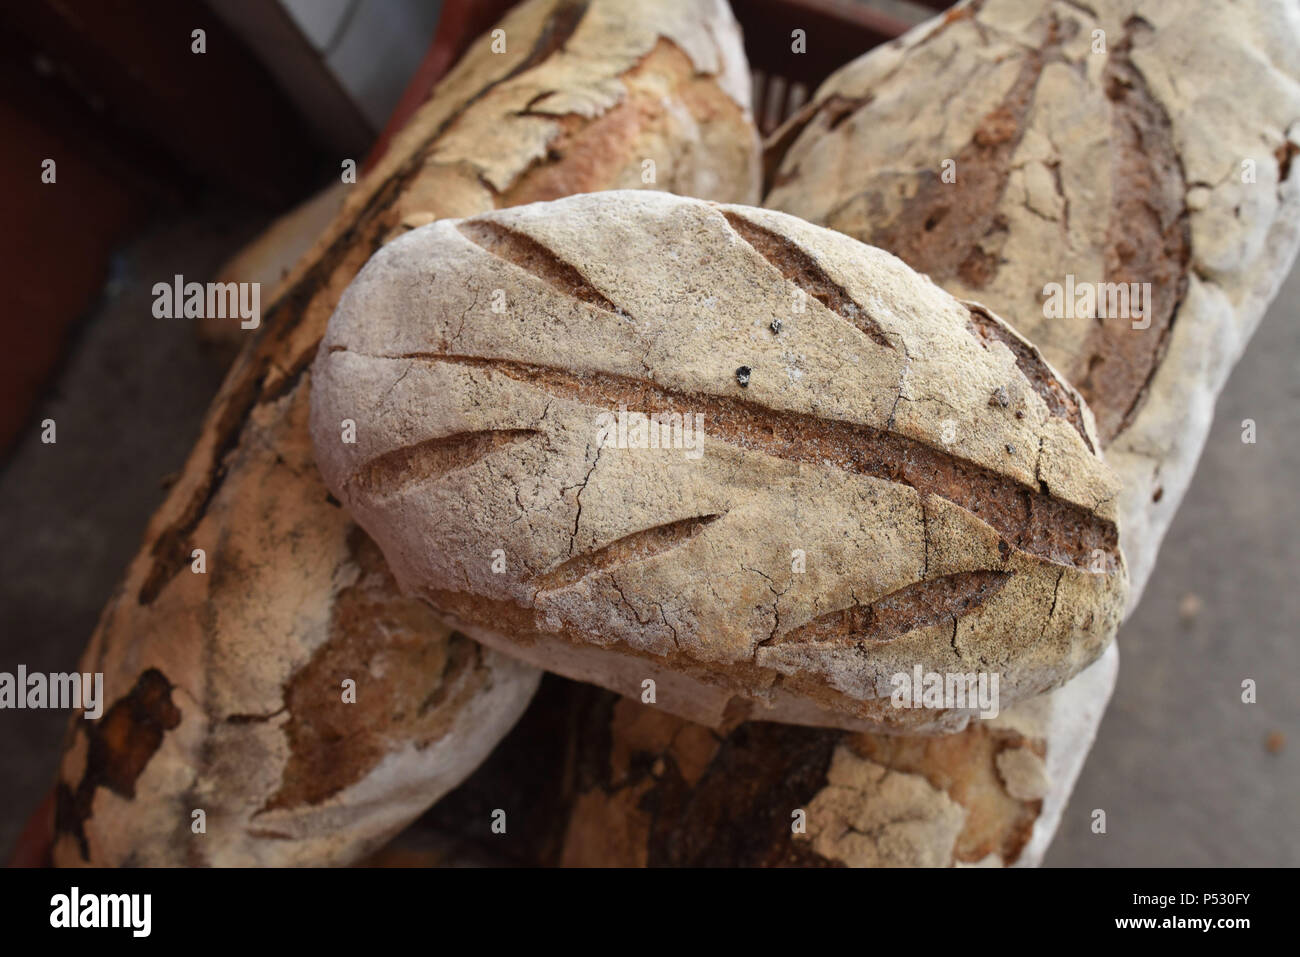 June 30, 2015 - Ungersheim, France: Bread made by Jean-Christophe and Lili Moyses, who describe themselves as "baker-peasants". The couple grow old varieties of wheat, including some a 1.80 meter-high variety, to produce flour and breads which are then locally sold. Ungersheim (population: 2000) is known as the greenest village in France because of its various environment-friendly initiatives: construction of a solar power plant, use of municipal agricultural land to promote local bio food, horse transport for school children, pesticide-free green spaces, eco-lodging, wood heating, etc. Ungers Stock Photo